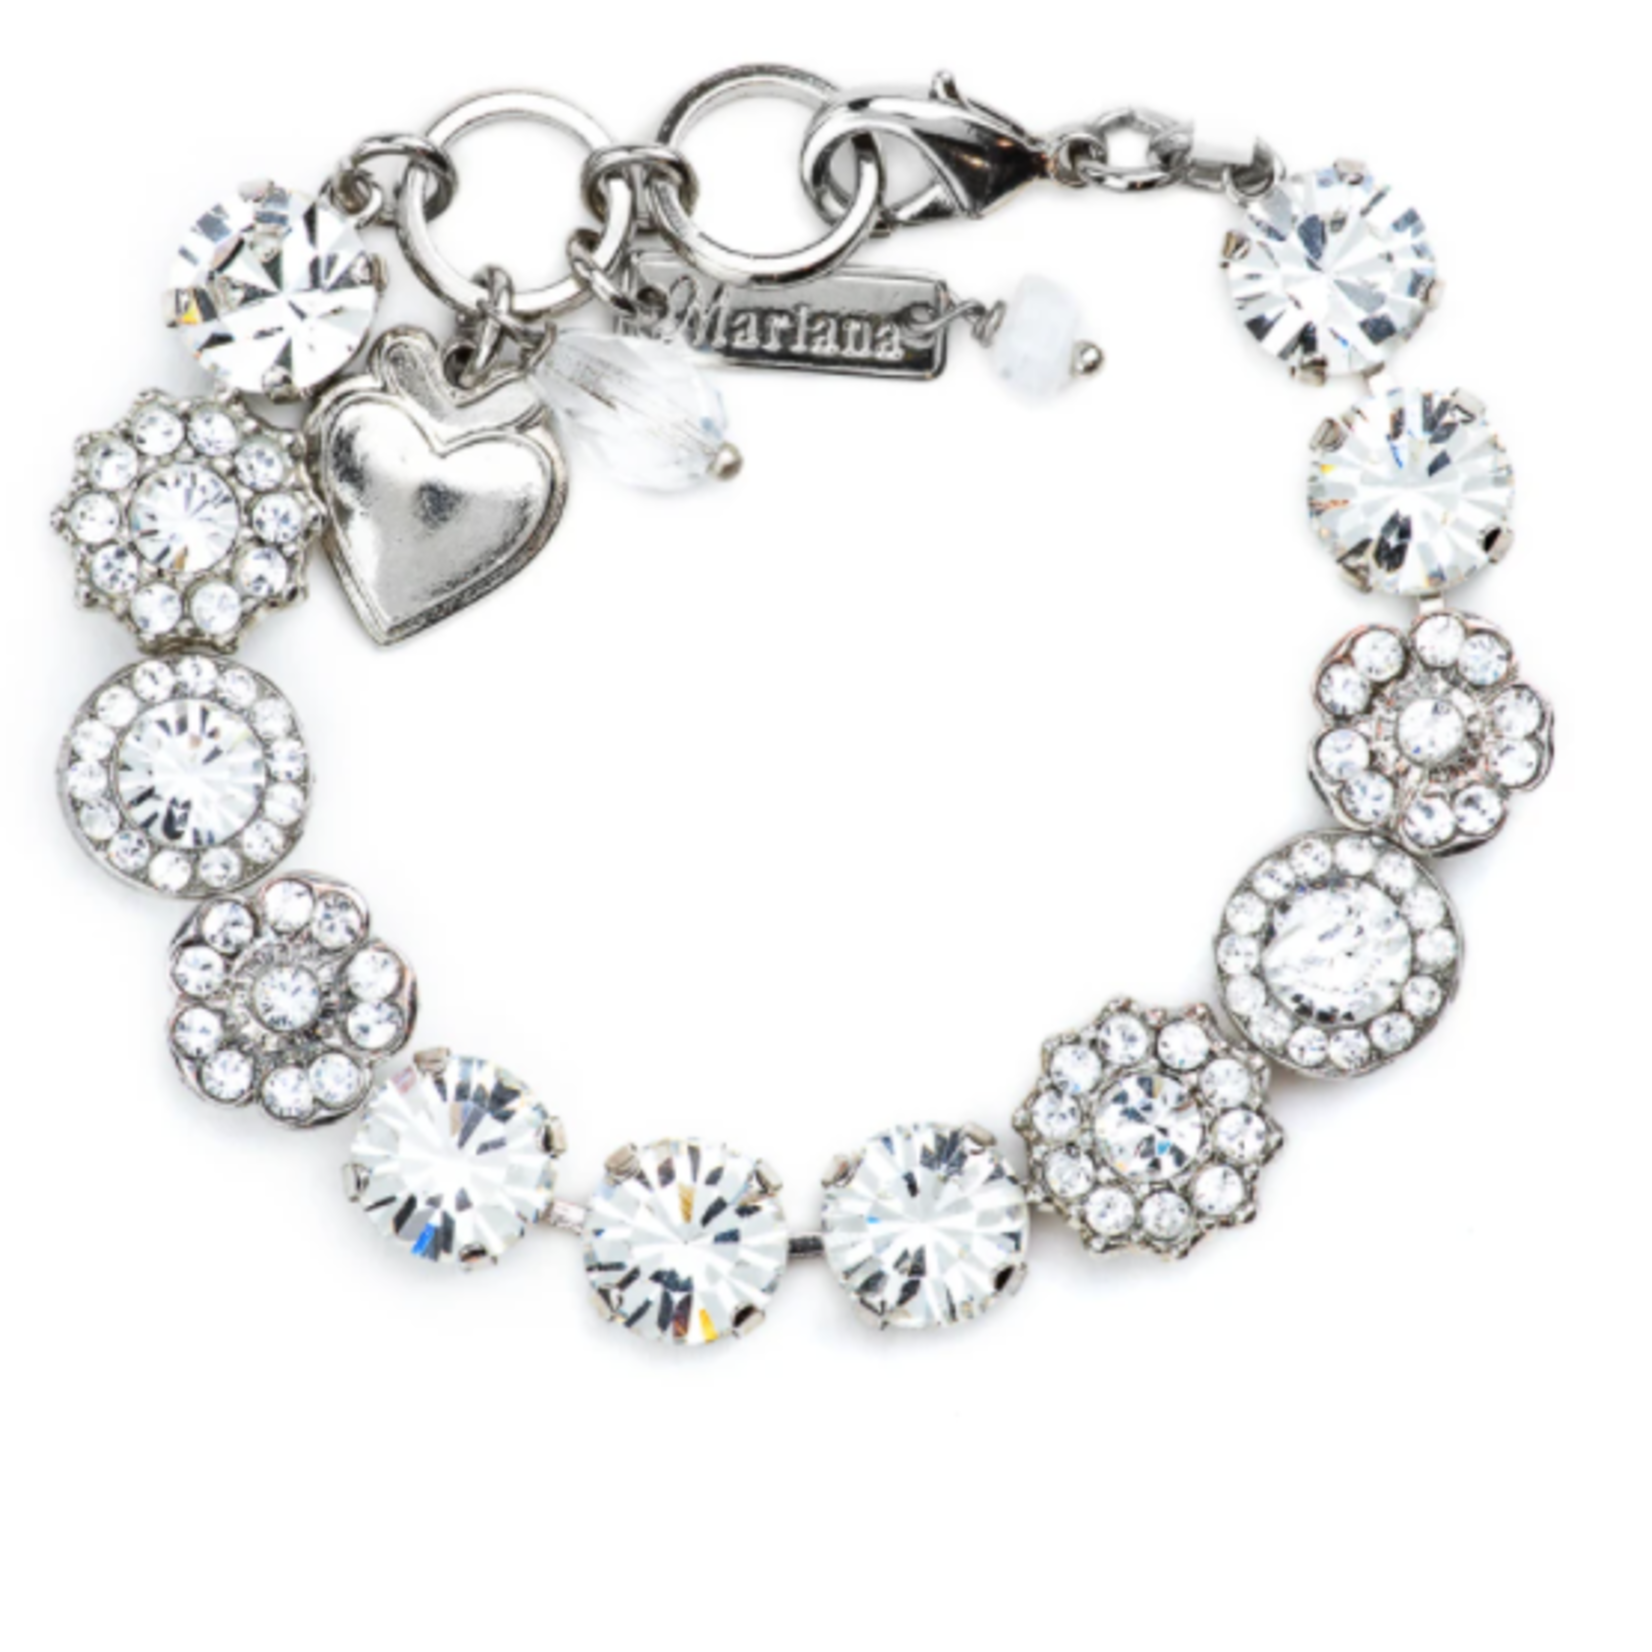 Mariana Lovable Rosette Bracelet "On A Clear Day" Rhodium